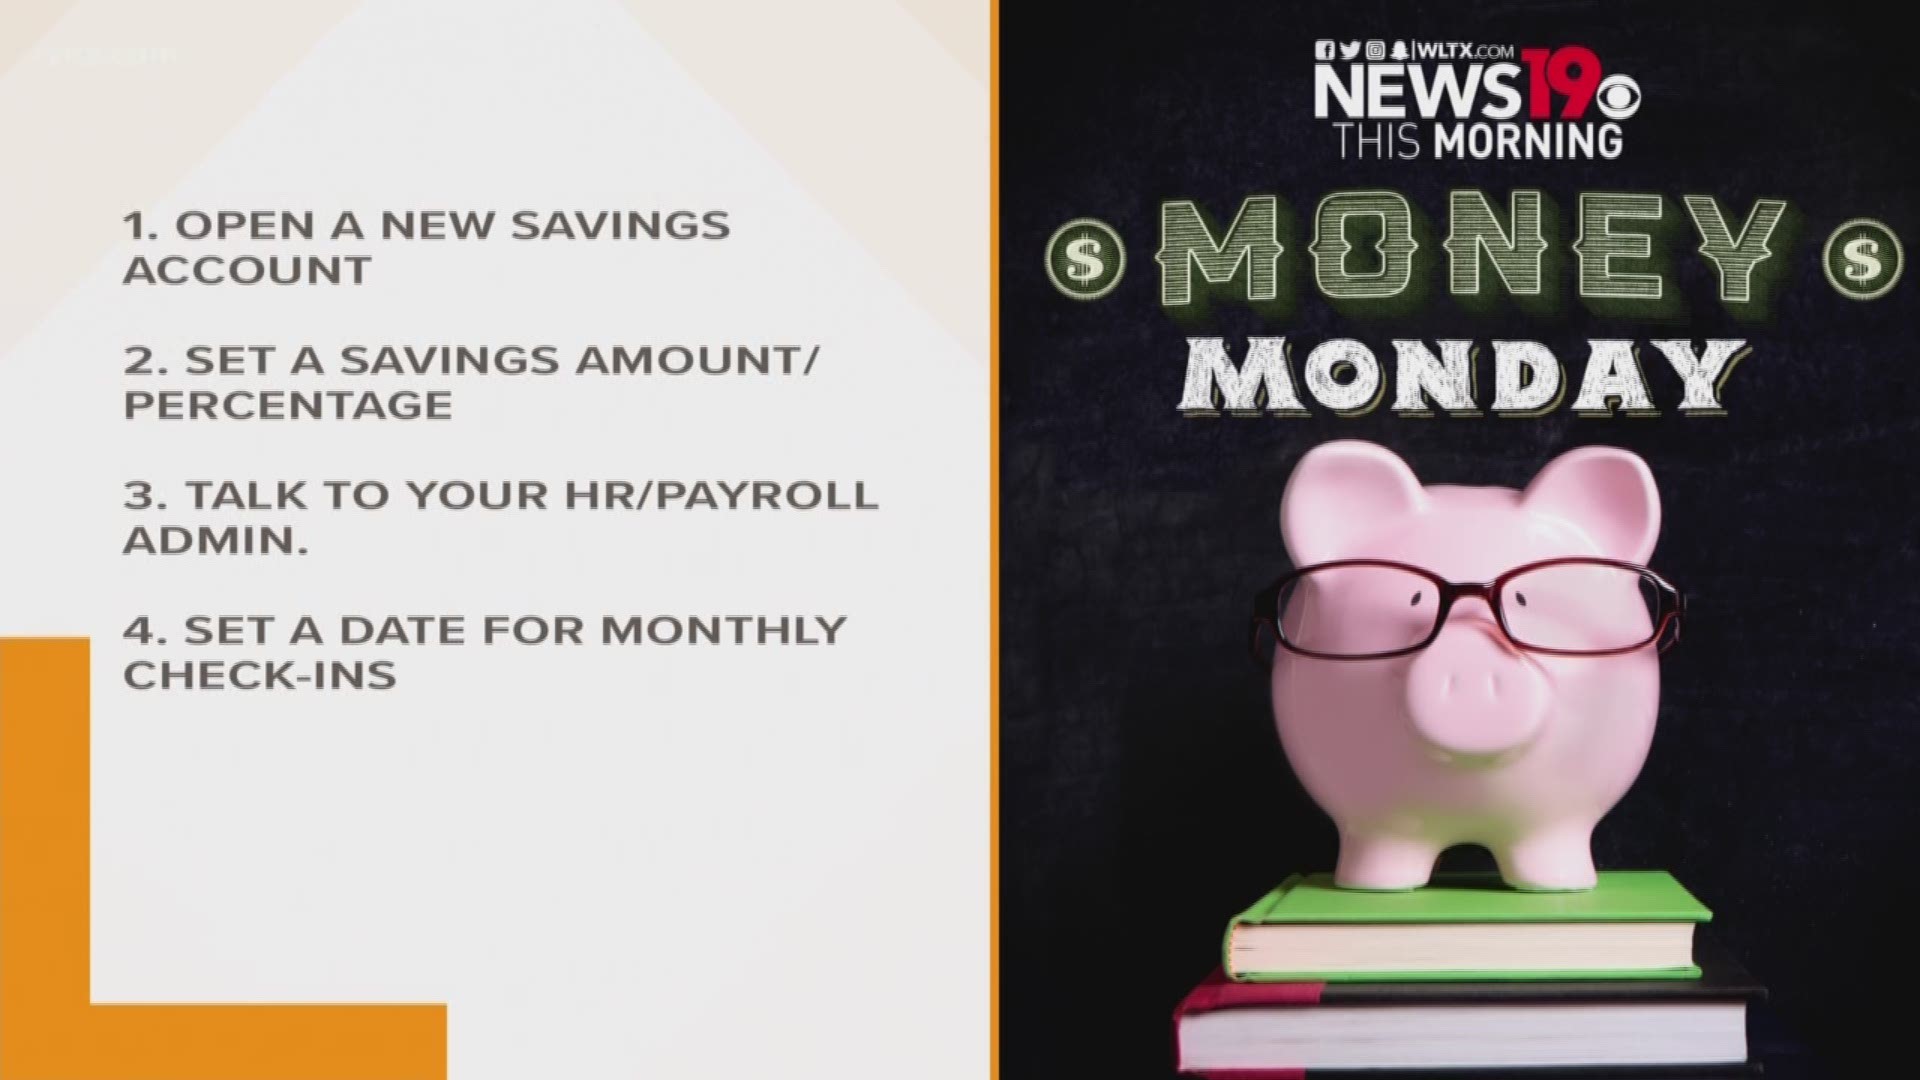 Steven Hughes stopped by the News19 Studios to discuss ways you can increase the amount in your savings account.